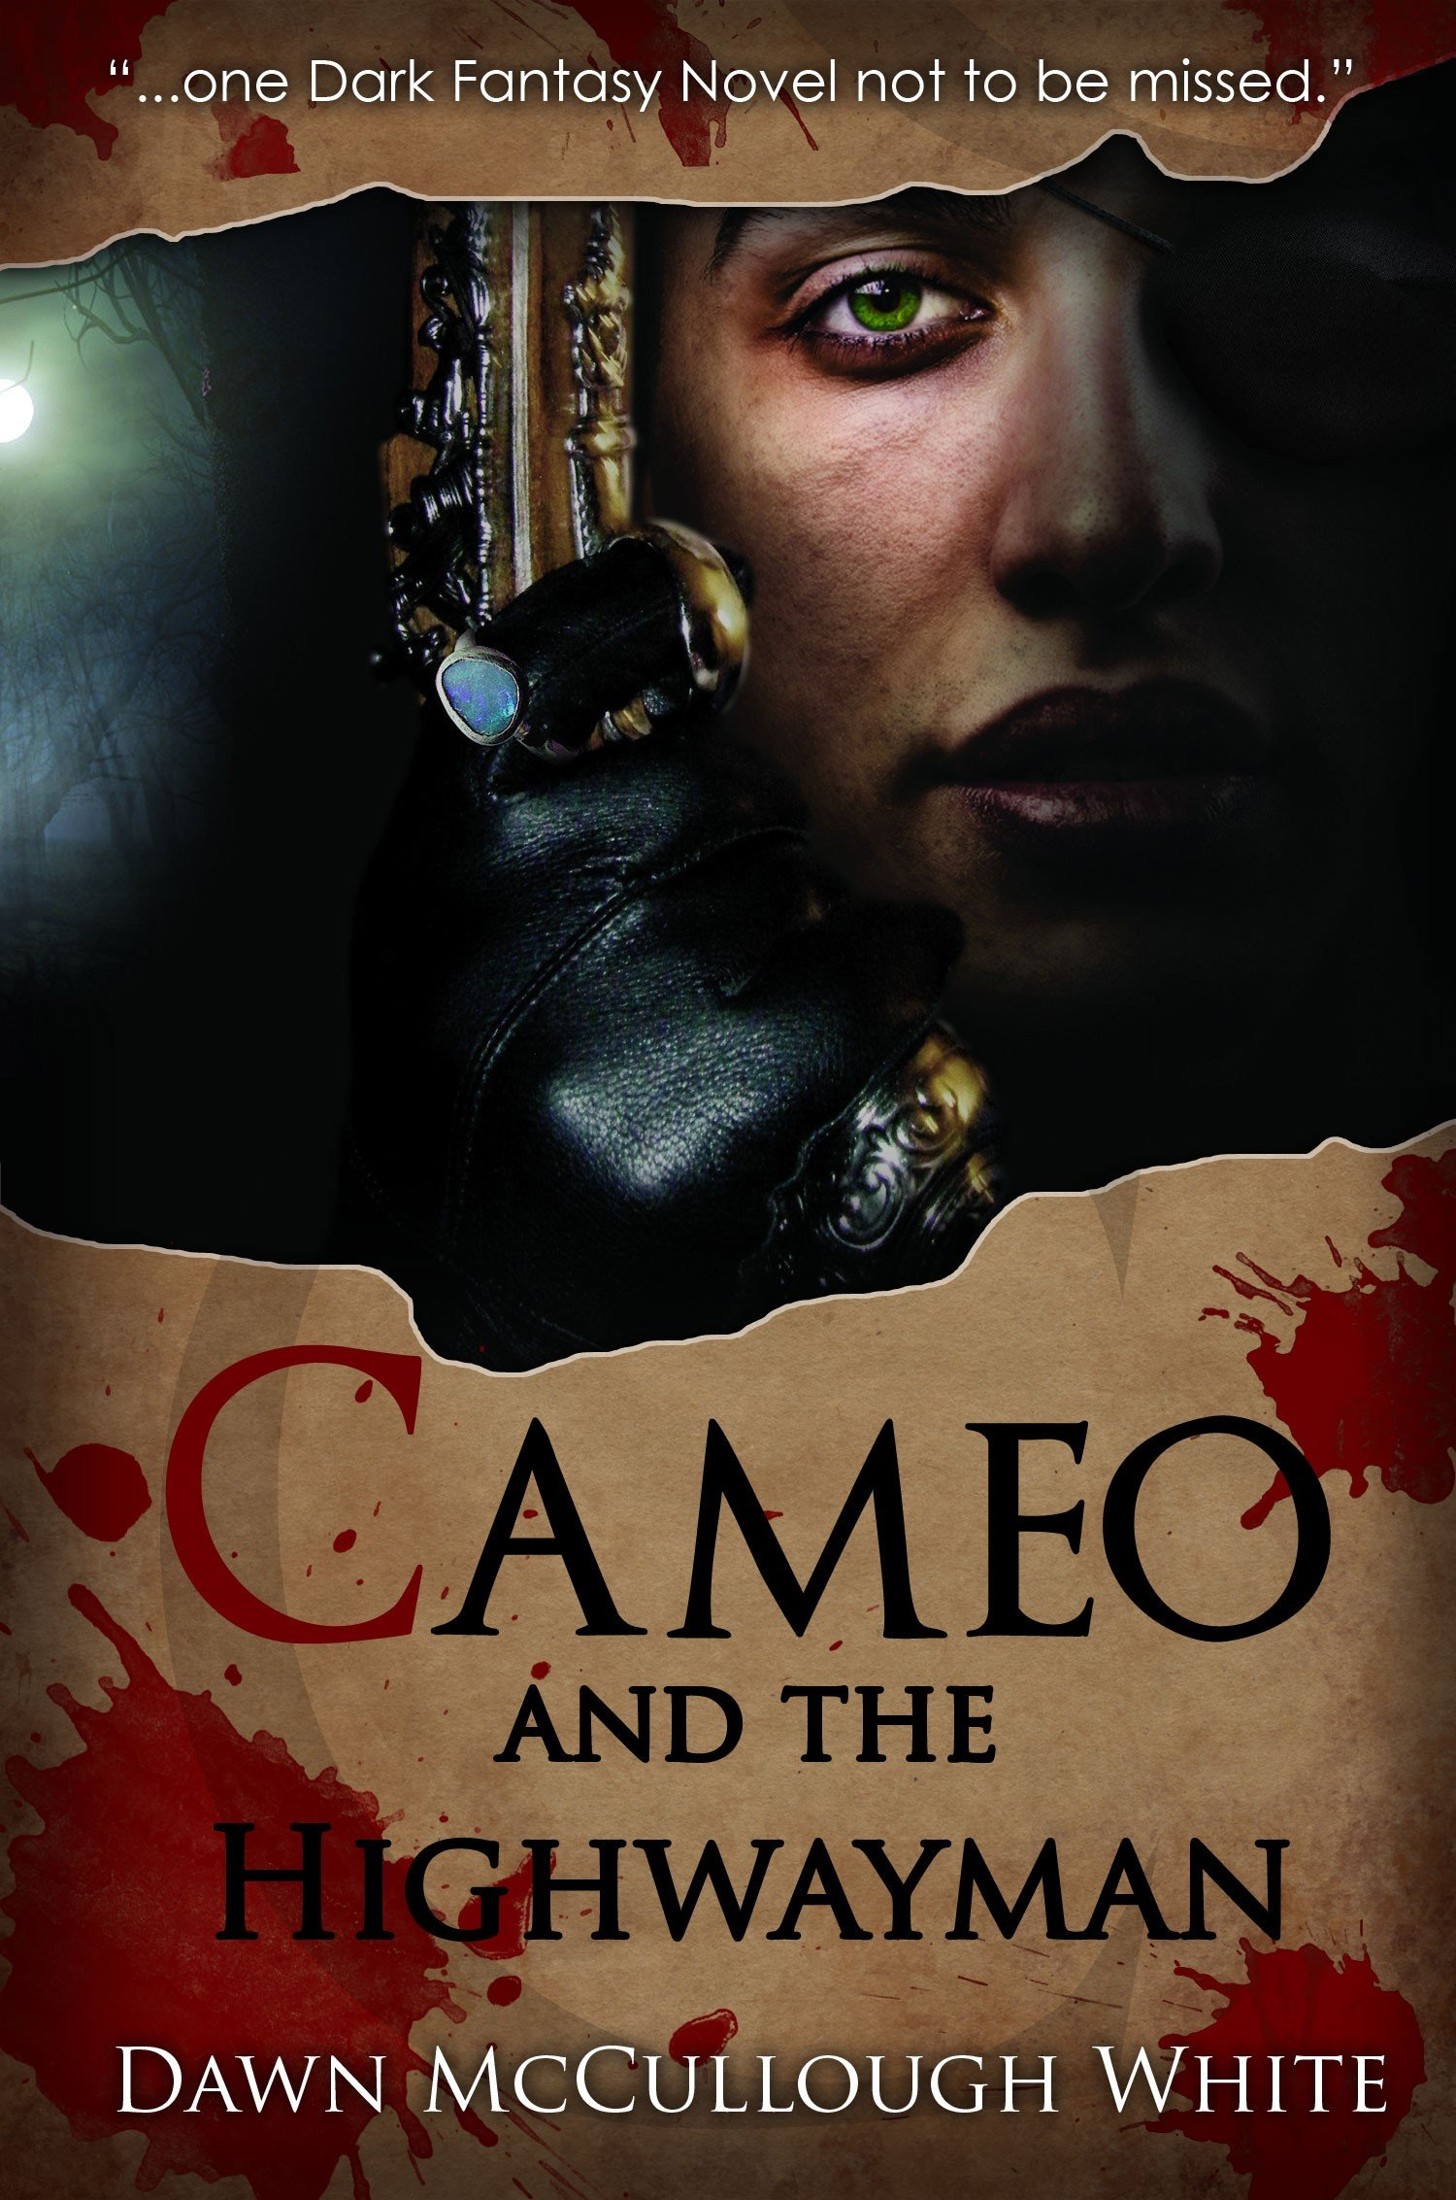 Cameo and the Highwayman (Trilogy of Shadows Book 2)